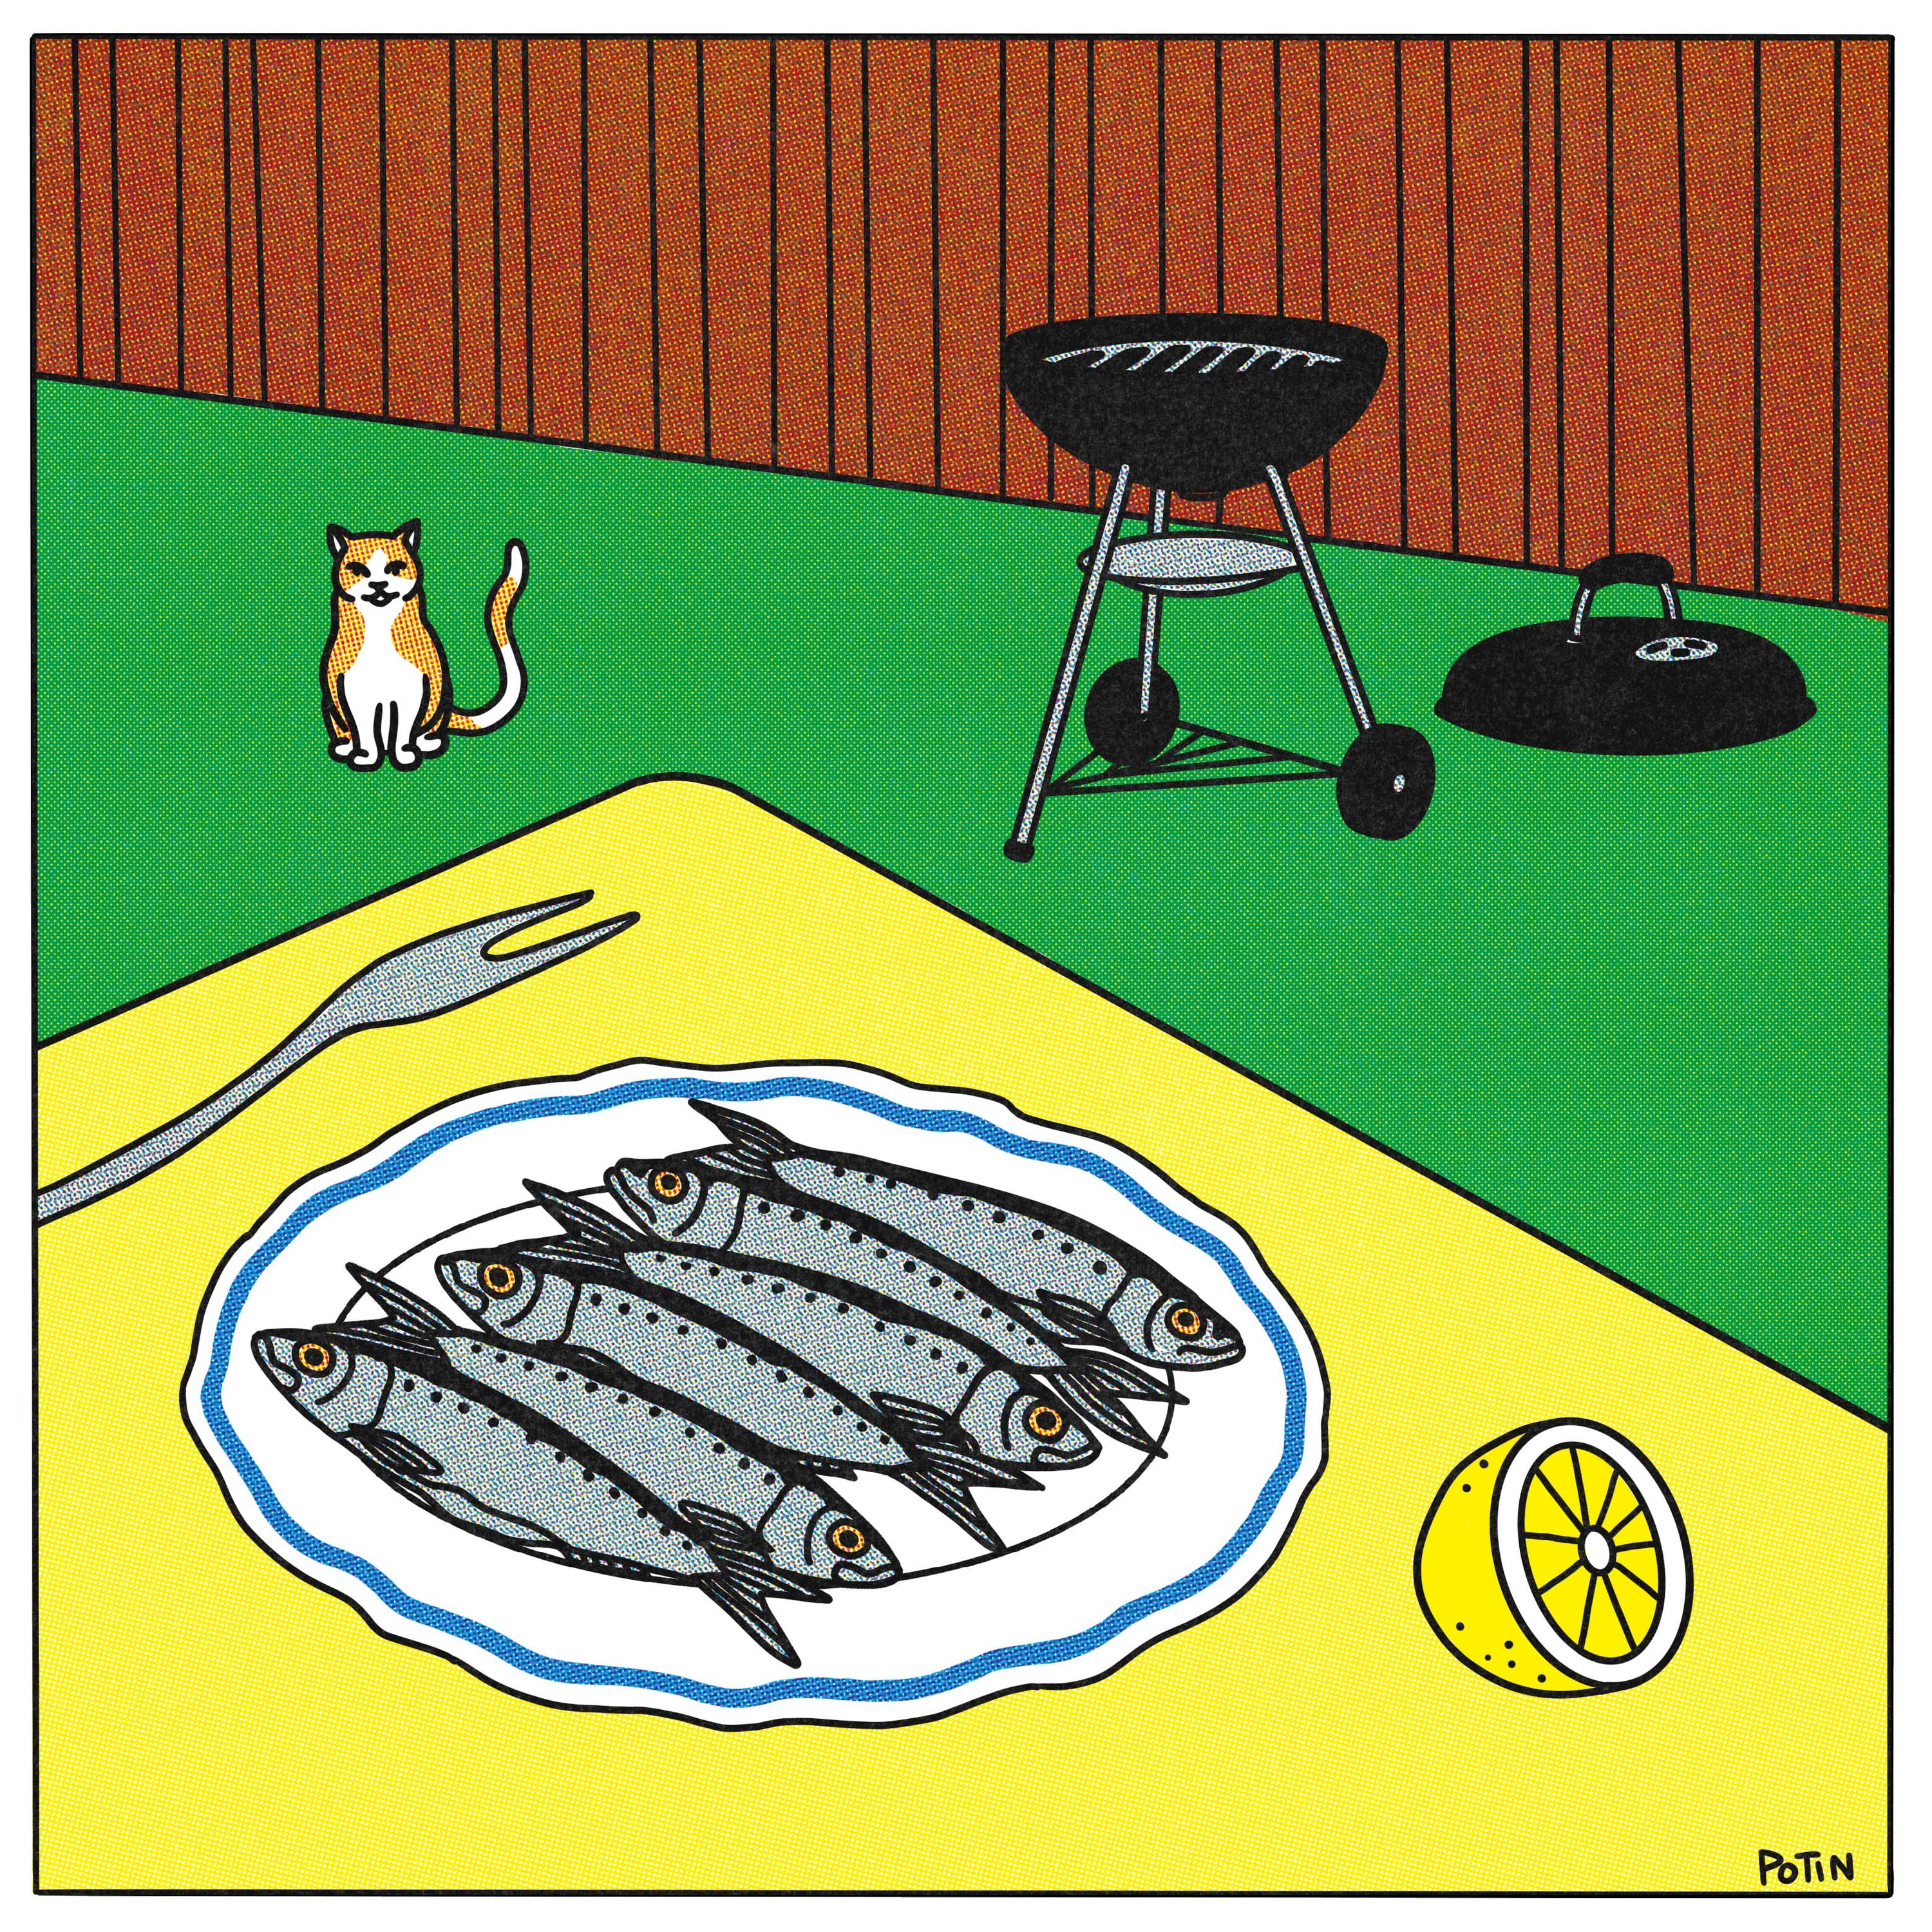 Vibrant "Barbecue" art print capturing the barbecue, garden, sardines and a sneaky cat